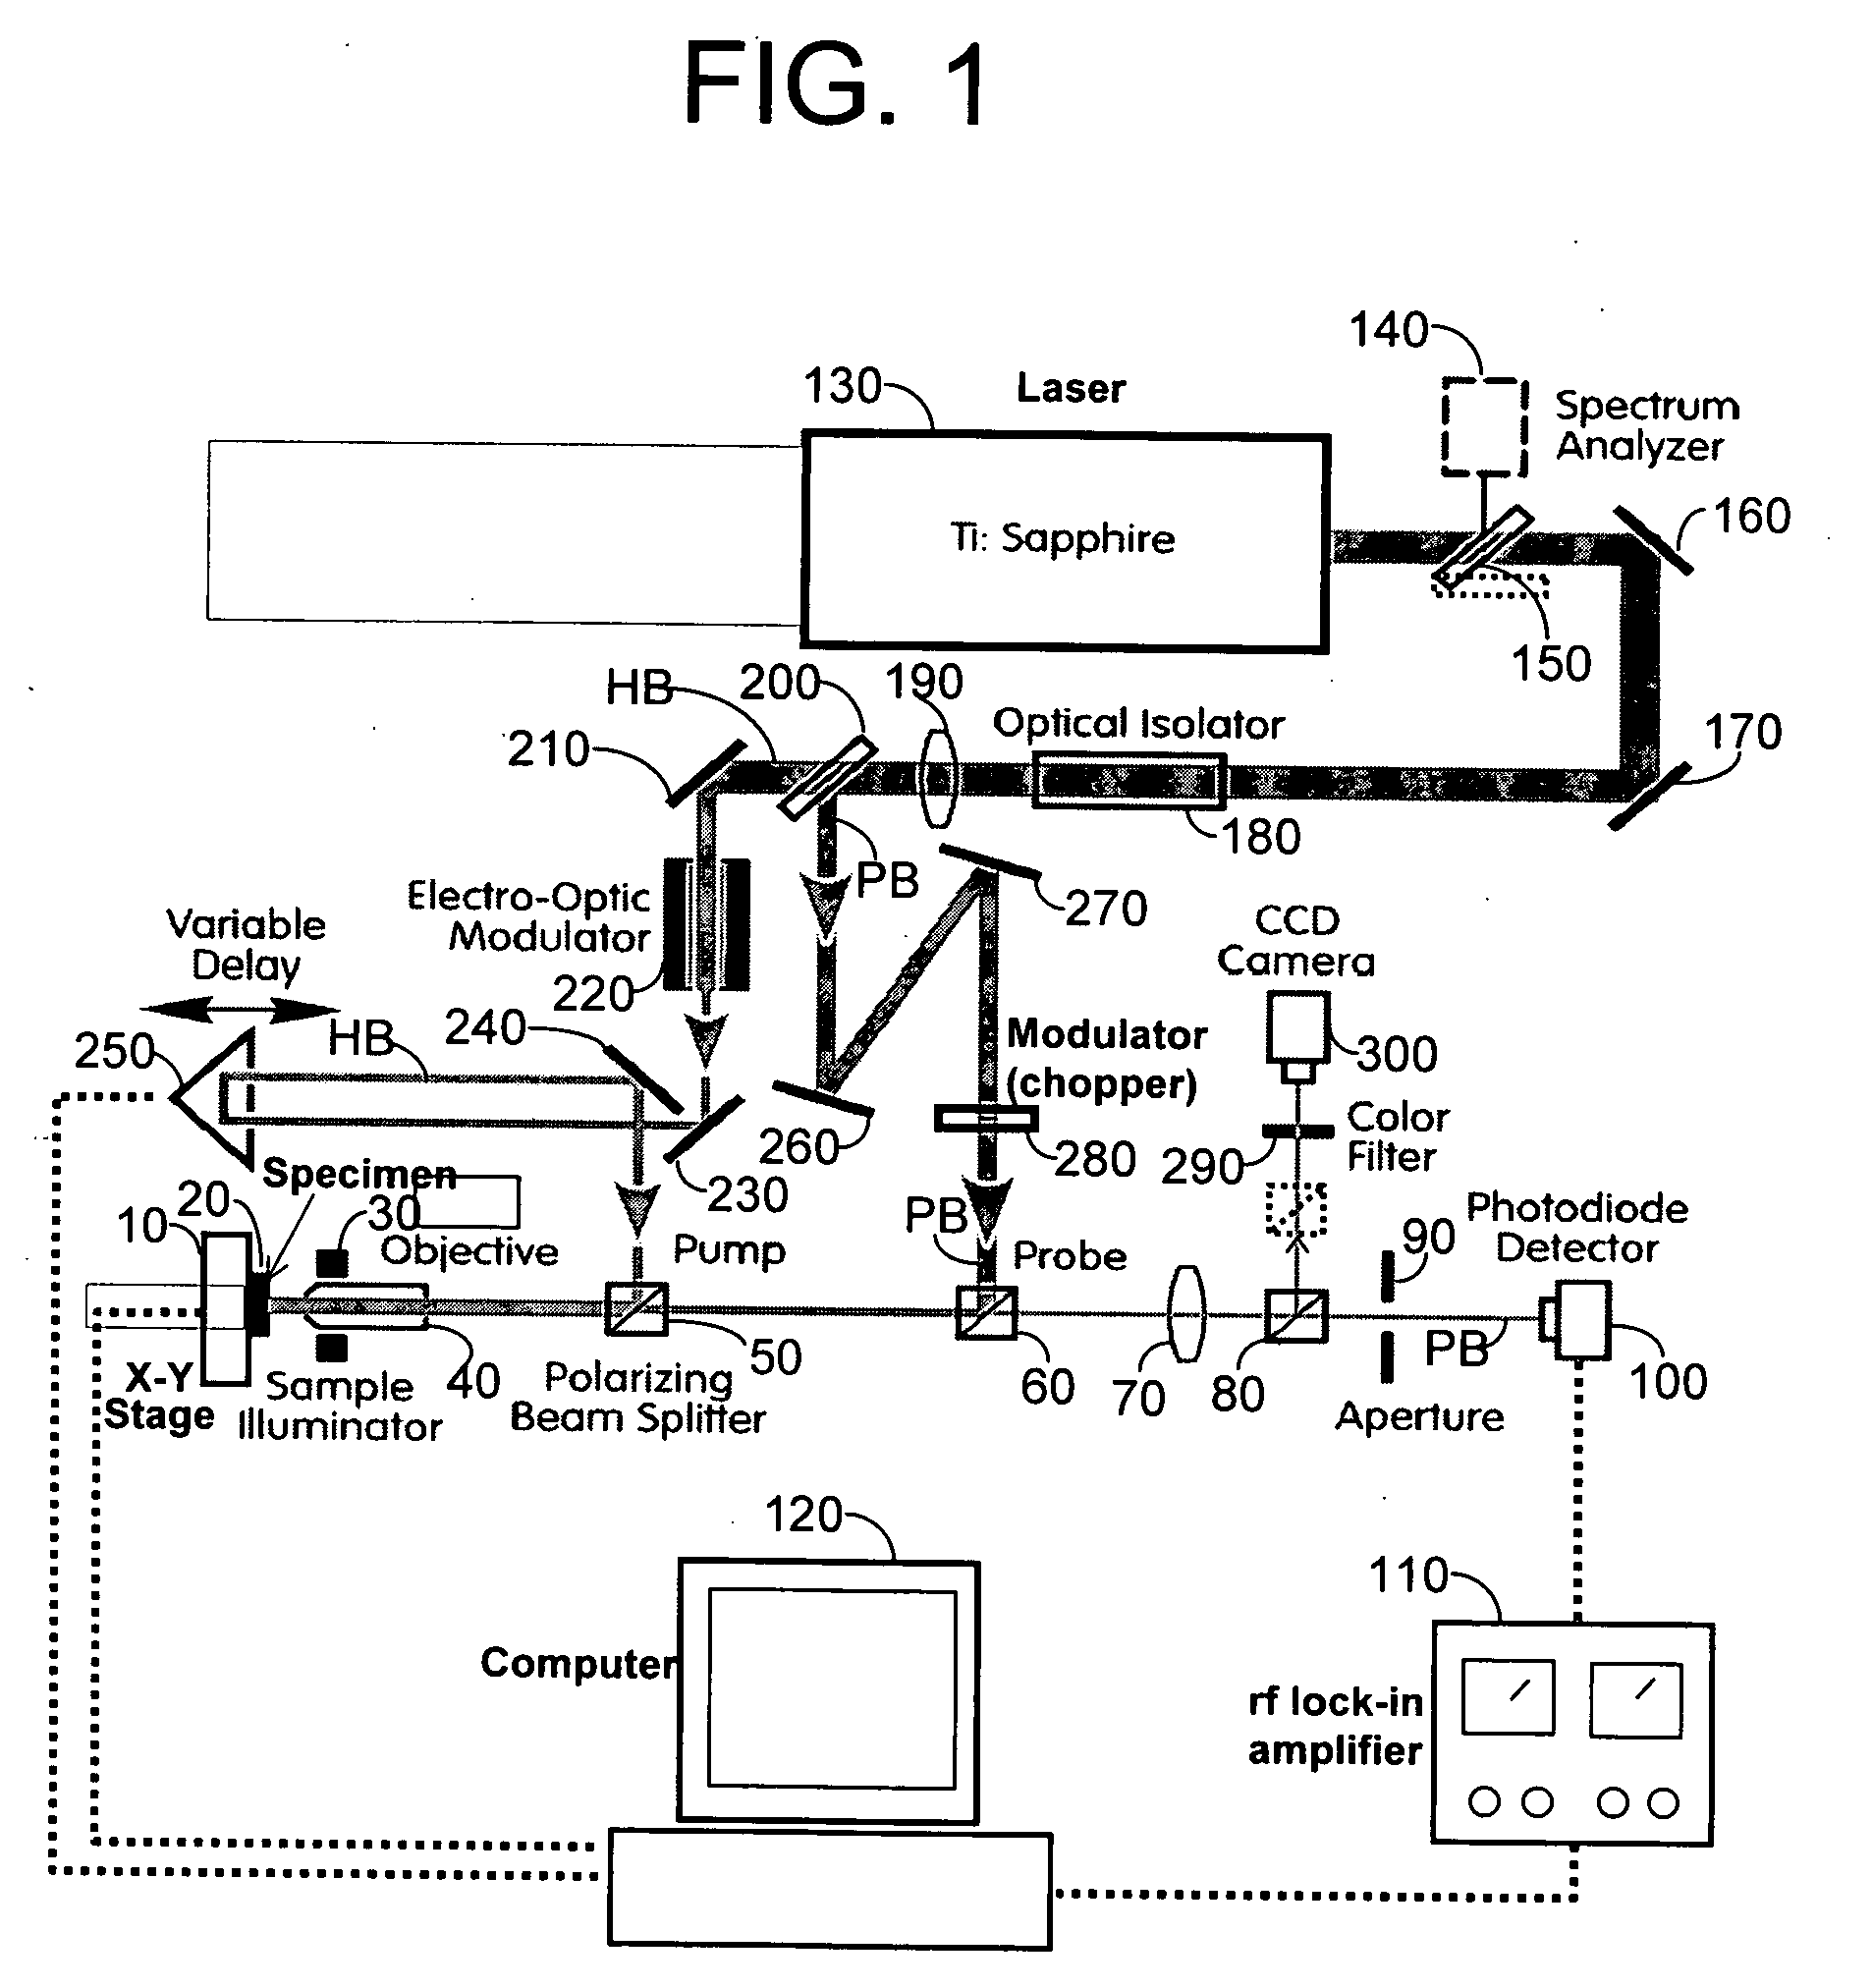 Apparatus and method for measuring thermal conductivity